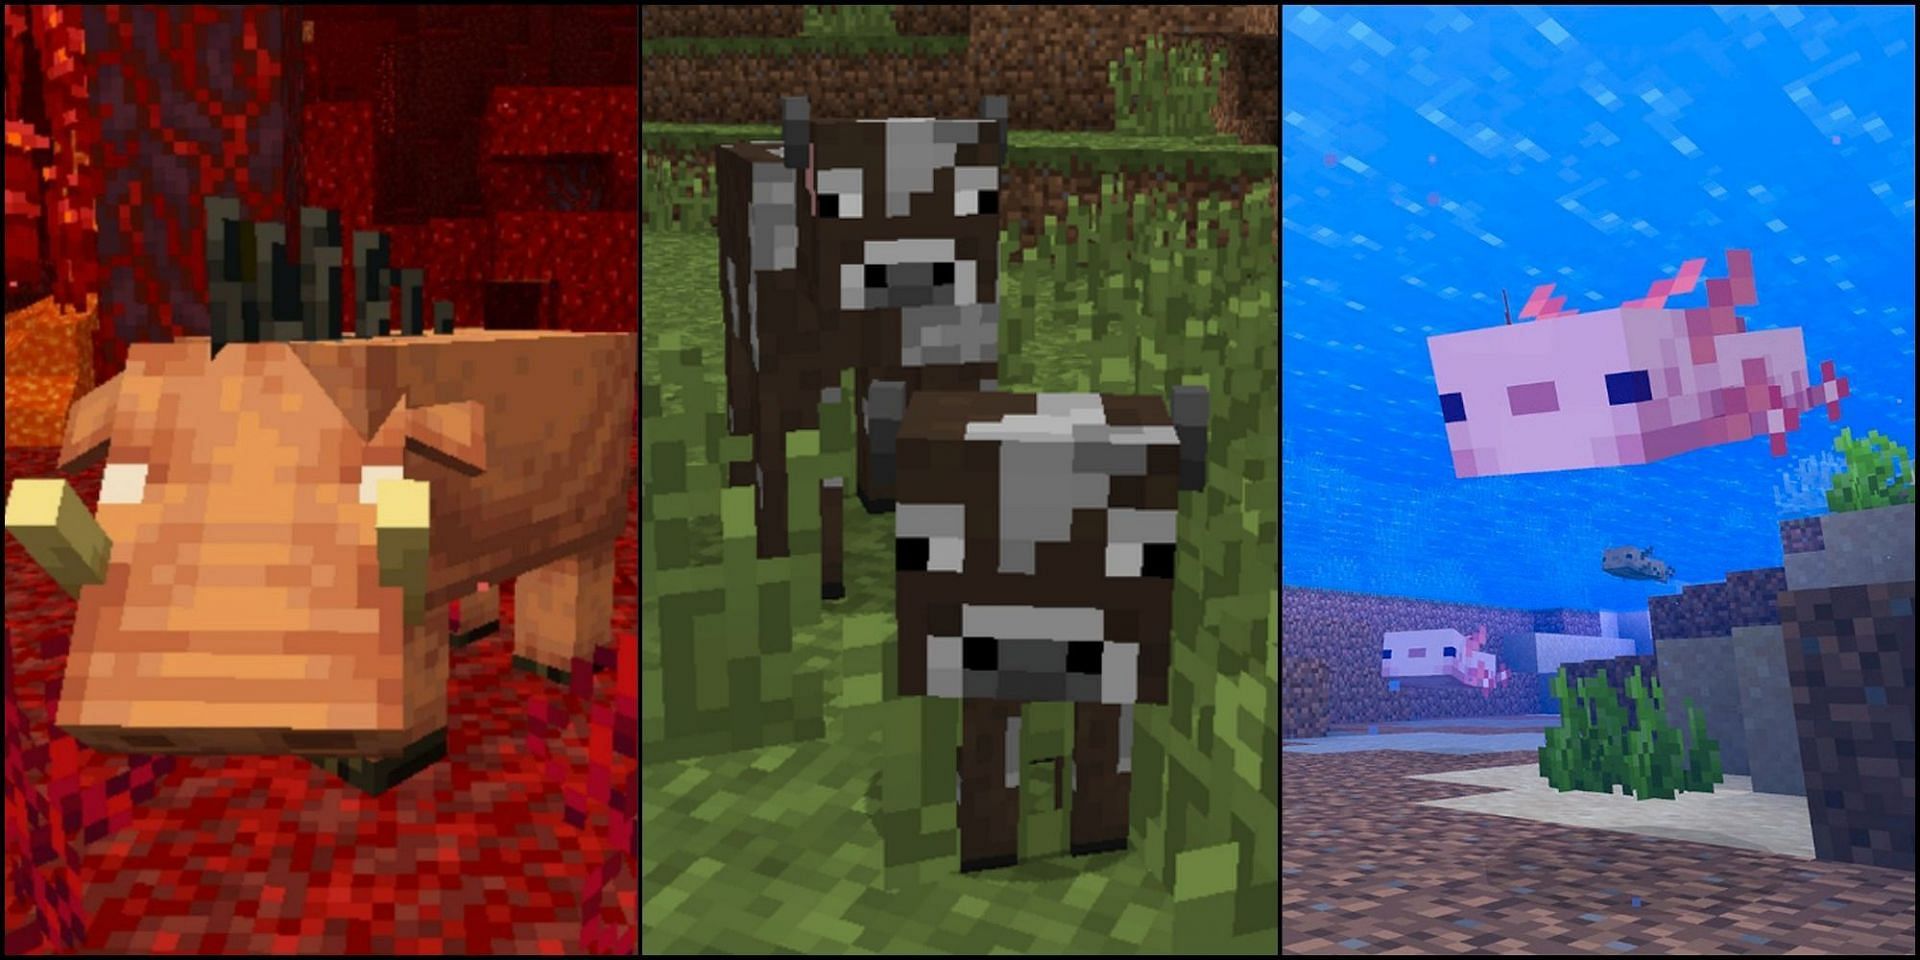 Breeding mobs has been almost as beloved a mob mechanic as taming (Image via Minecraft)